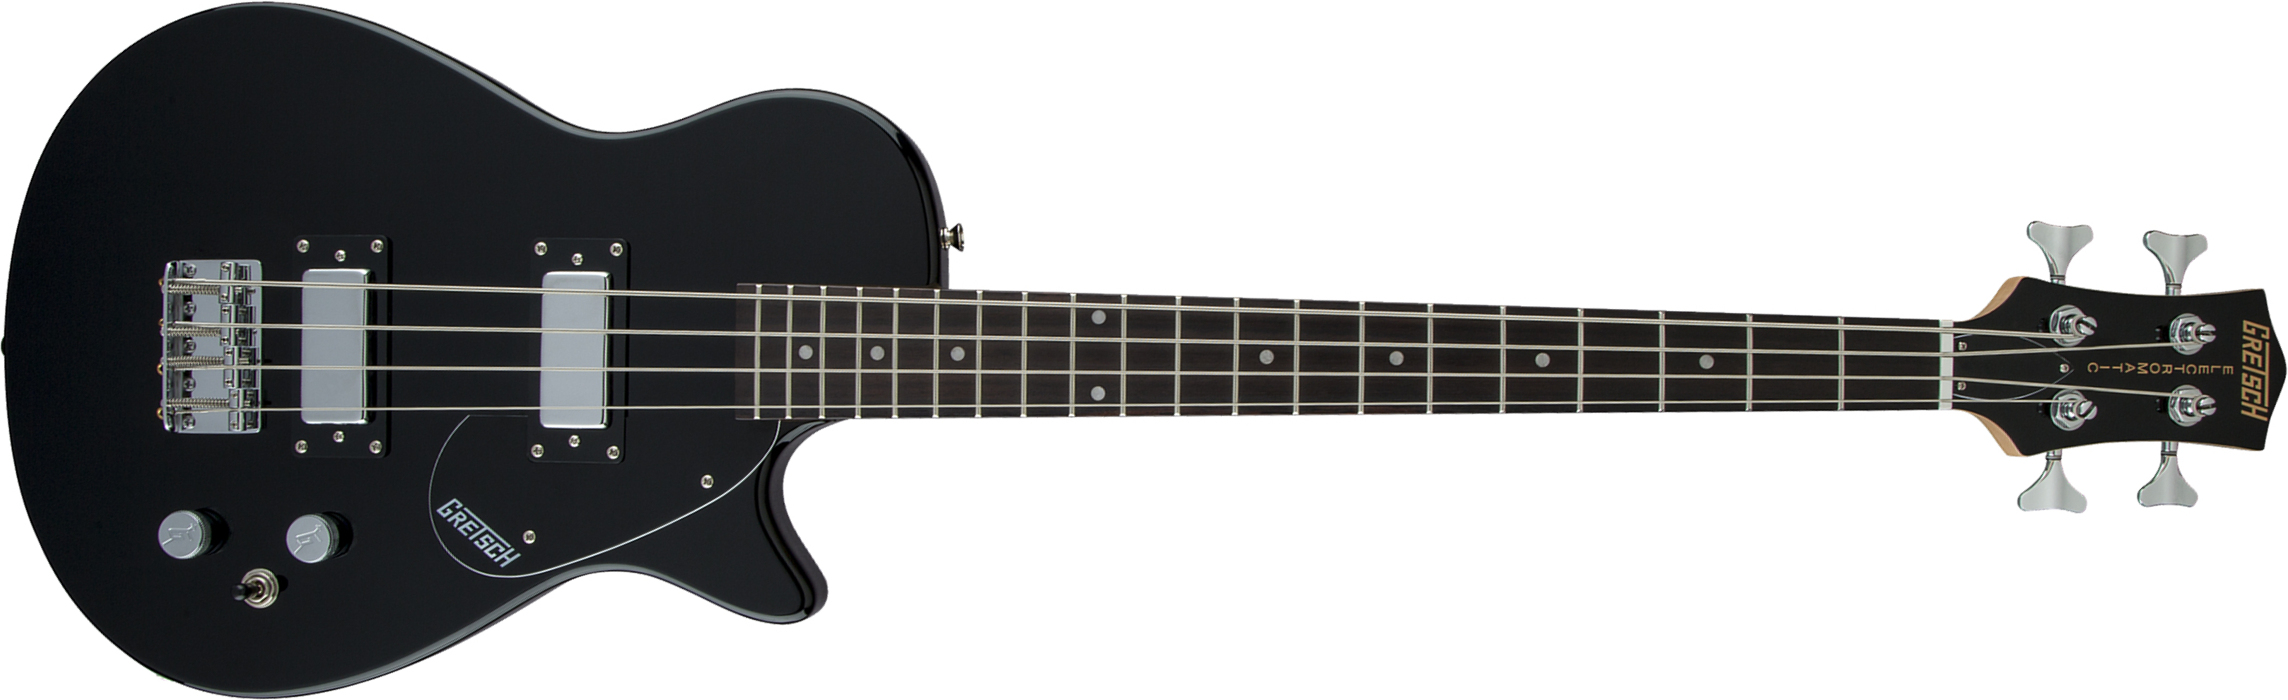 Gretsch G2220 Electromatic Junior Jet Bass Ii Short-scale 2019 Hh Wal - Black - Solid body electric bass - Main picture